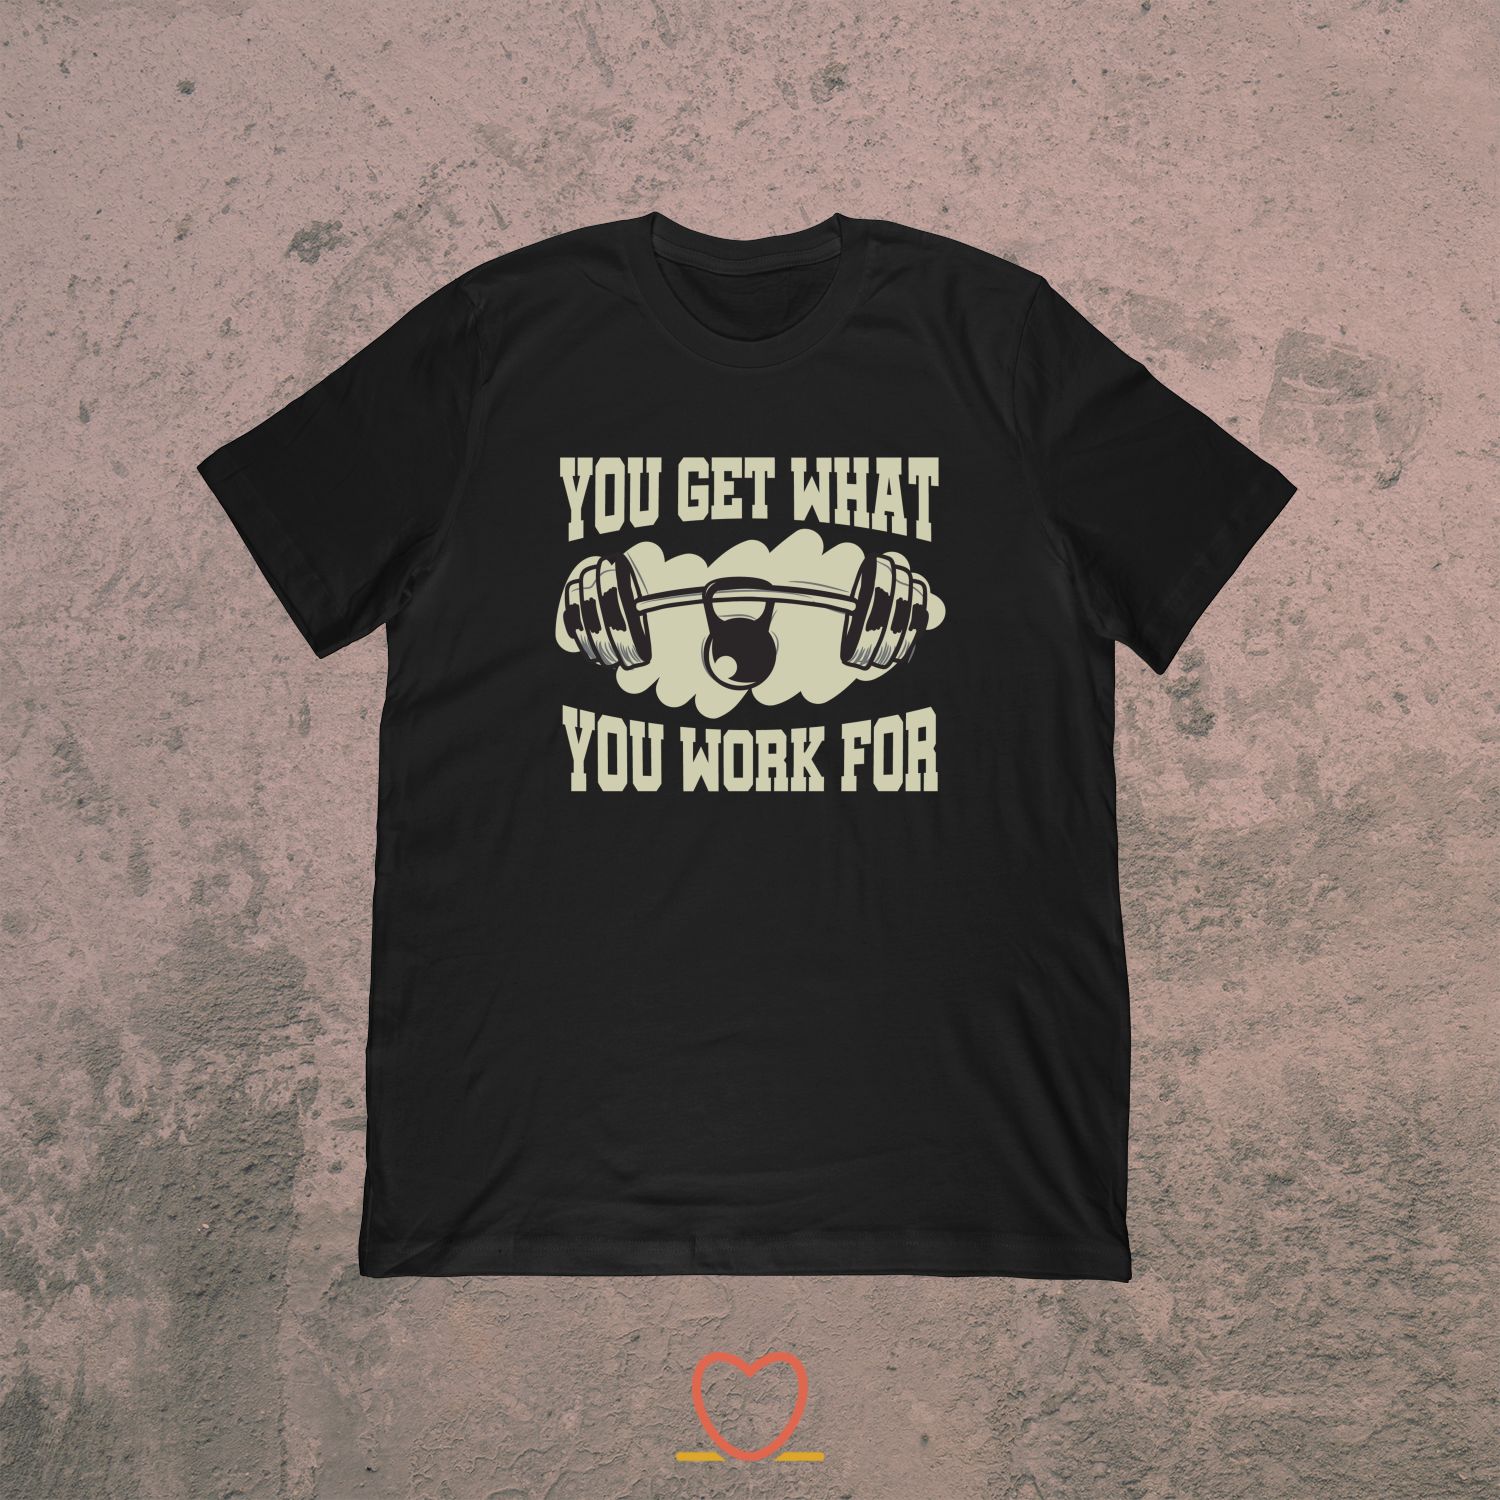 You Get What You Work For – Wellness Fitness Tee